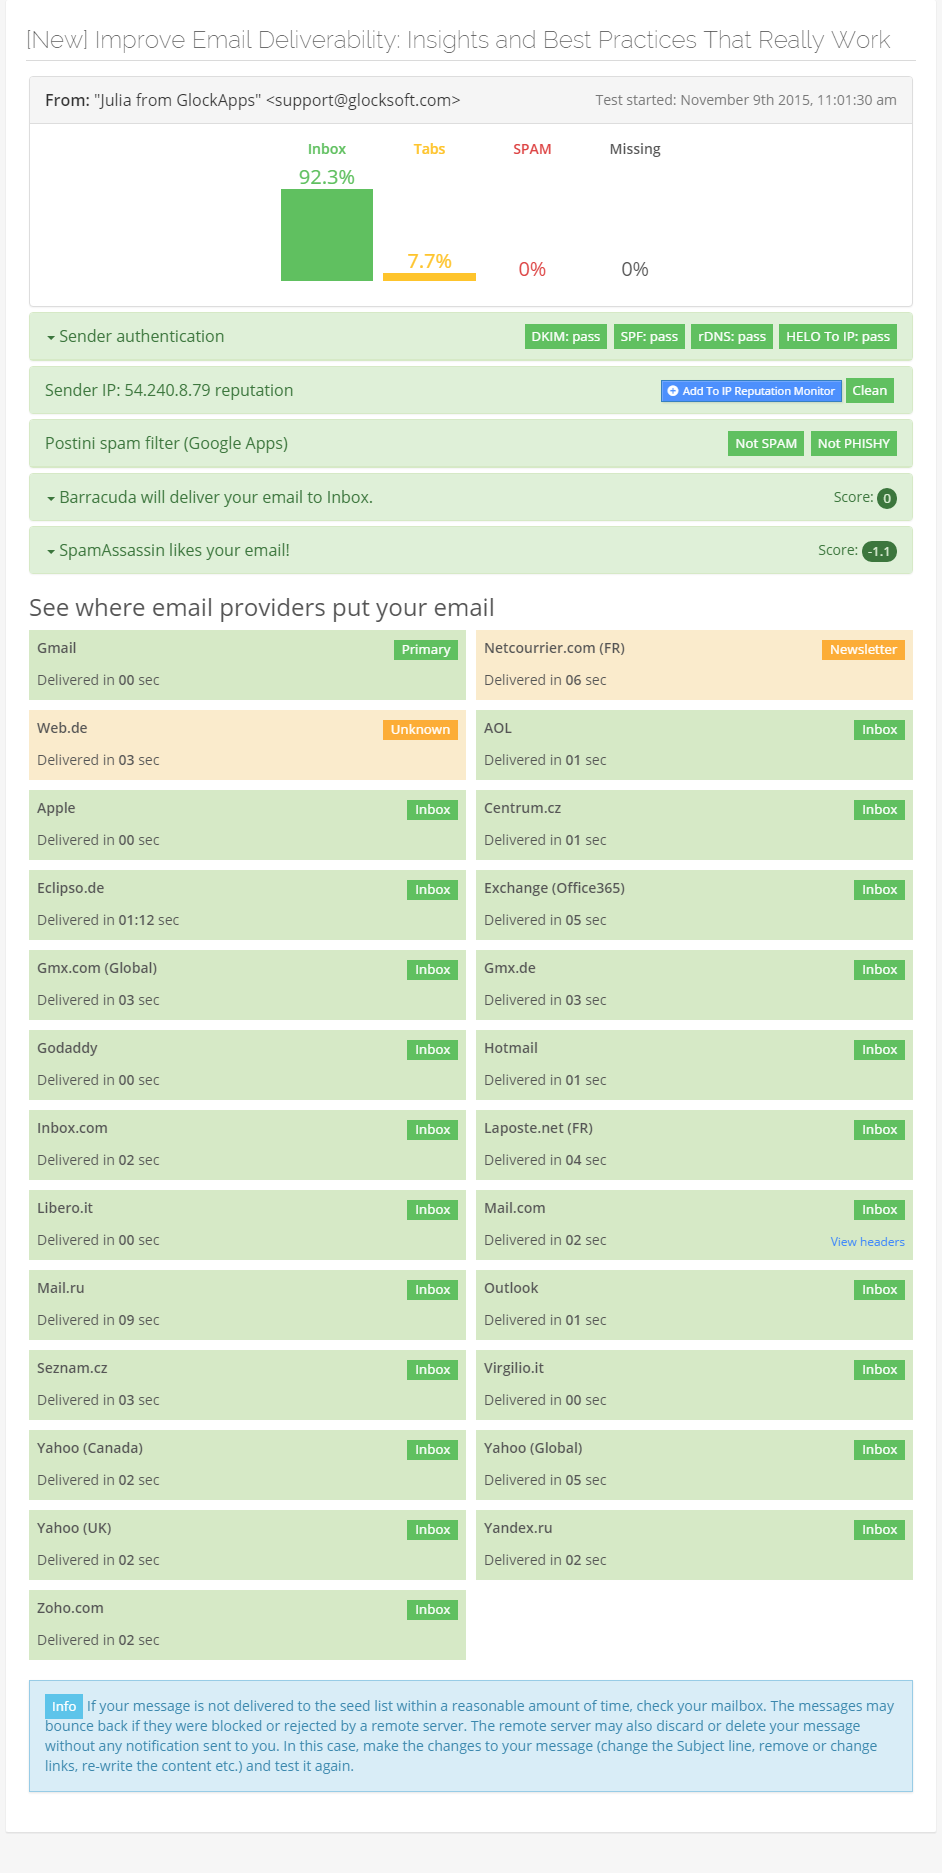 GlockApps email deliverability and spam testing report